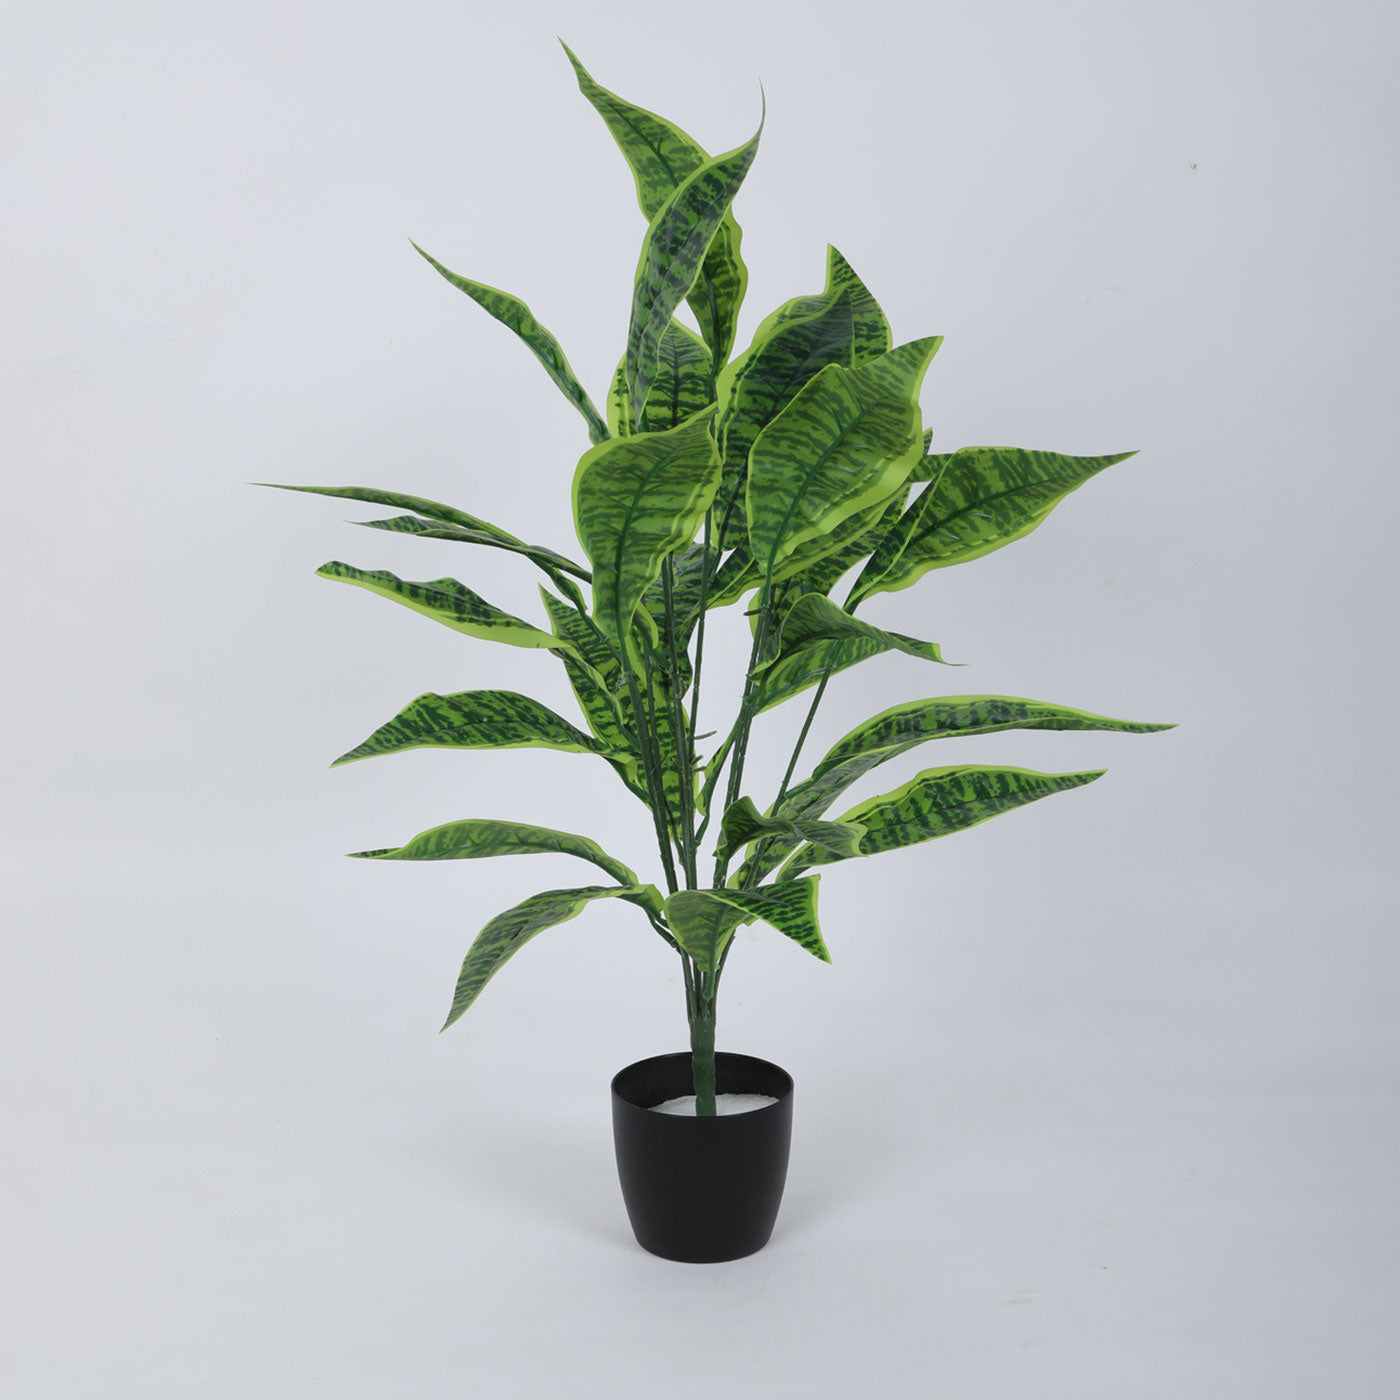 Artificial Snake Plant for Home Decor/Office Decor/Gifting | with Basic Black Pot | Natural Looking Indoor Plant (26 Leaves, 70 cm, Multicolor)